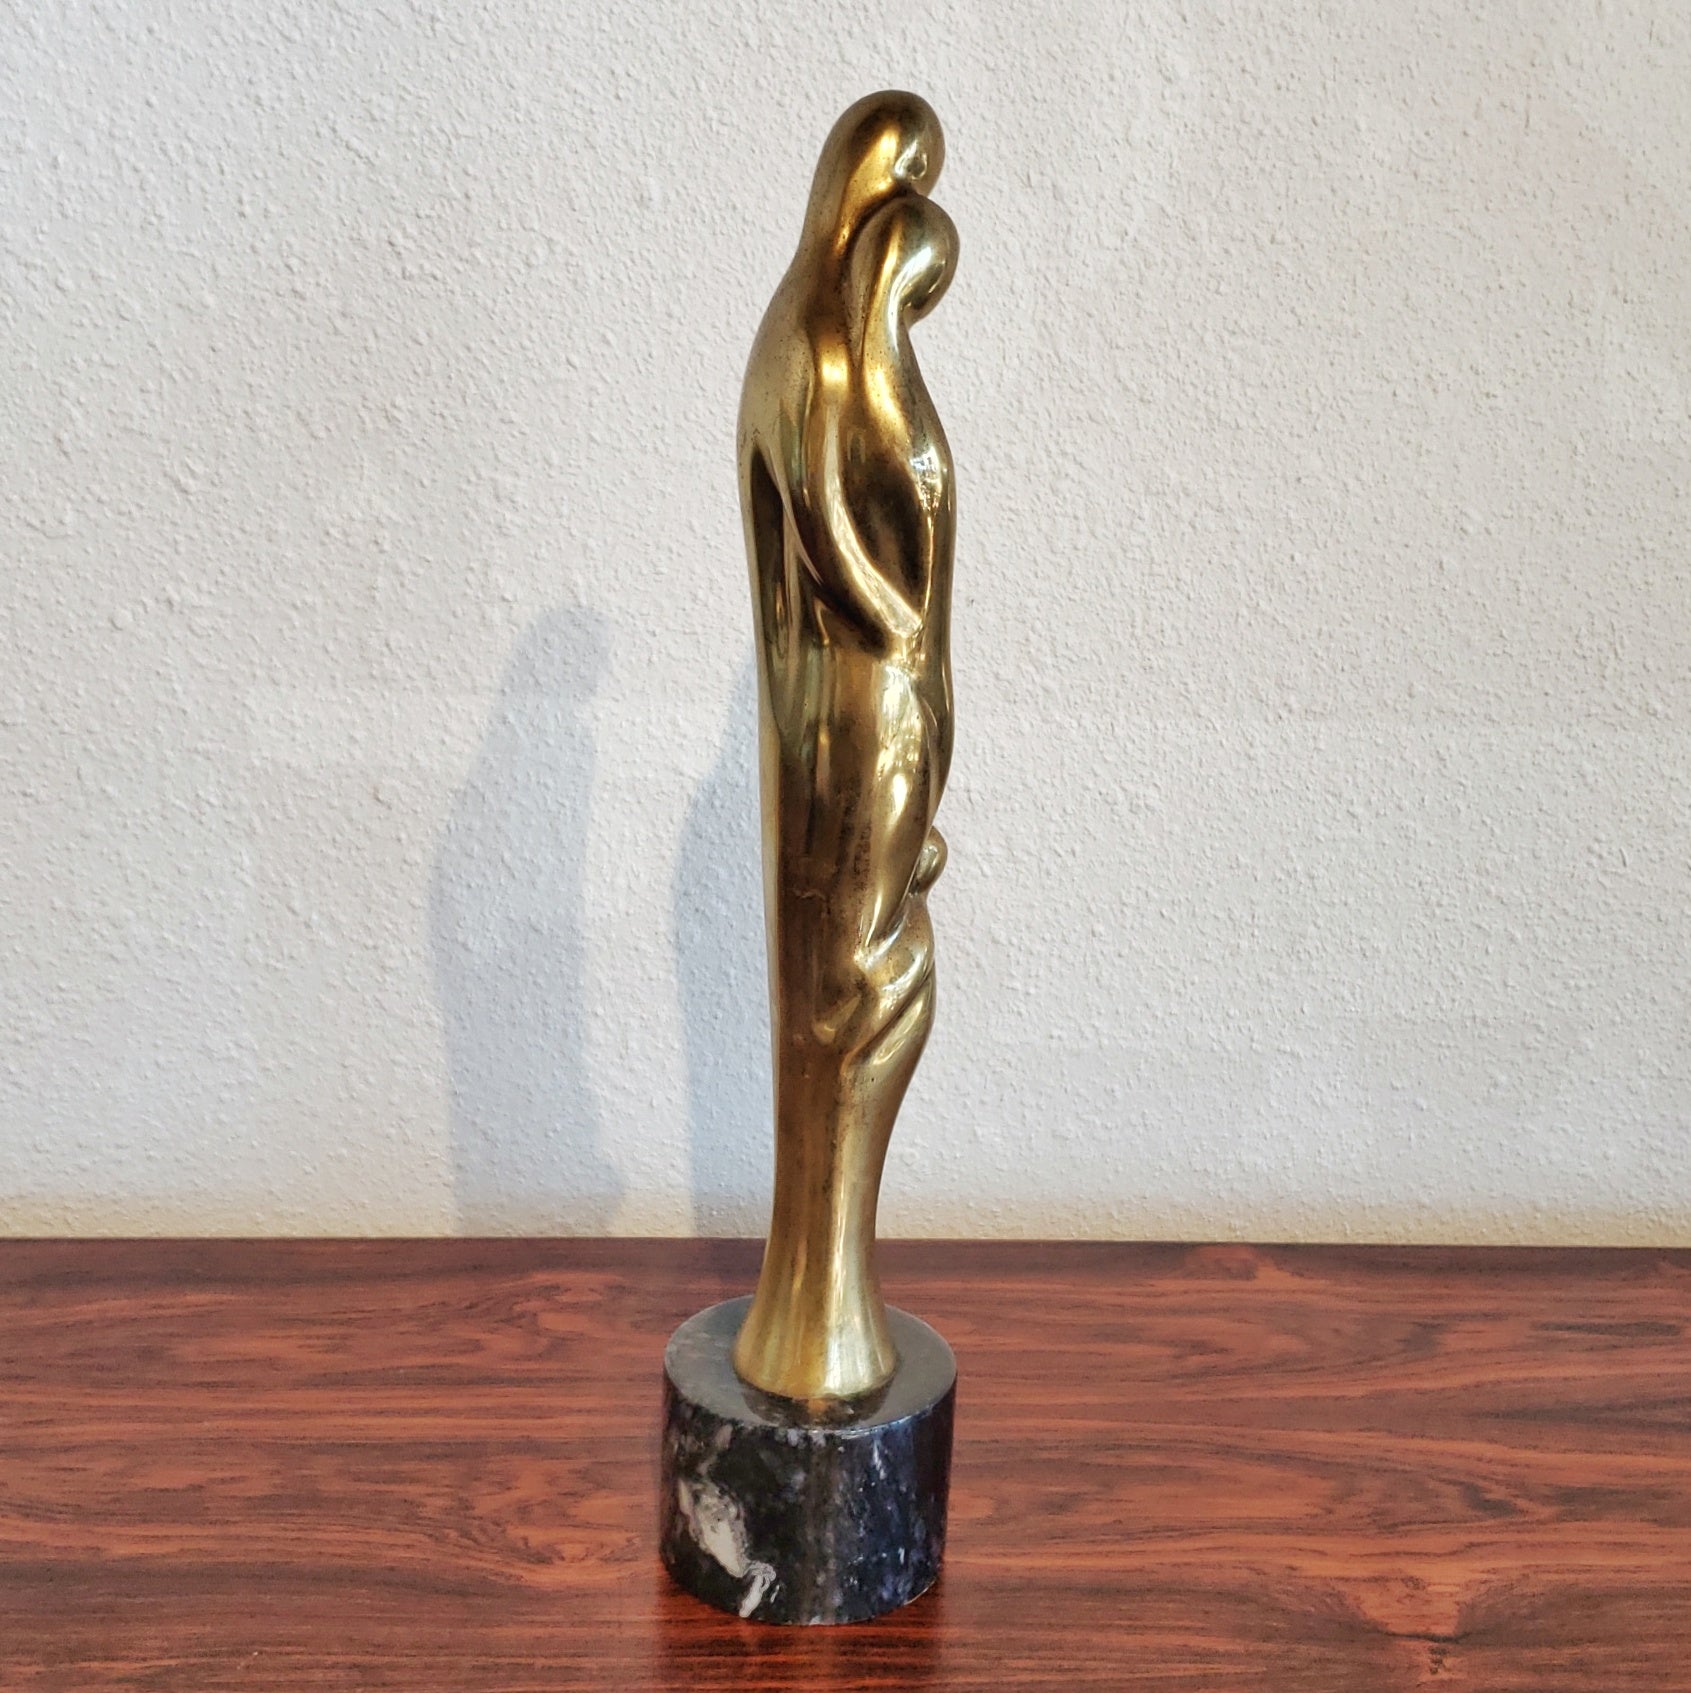 SOLID BRASS FAMILY STATUETTE AFTER JEAN ARP